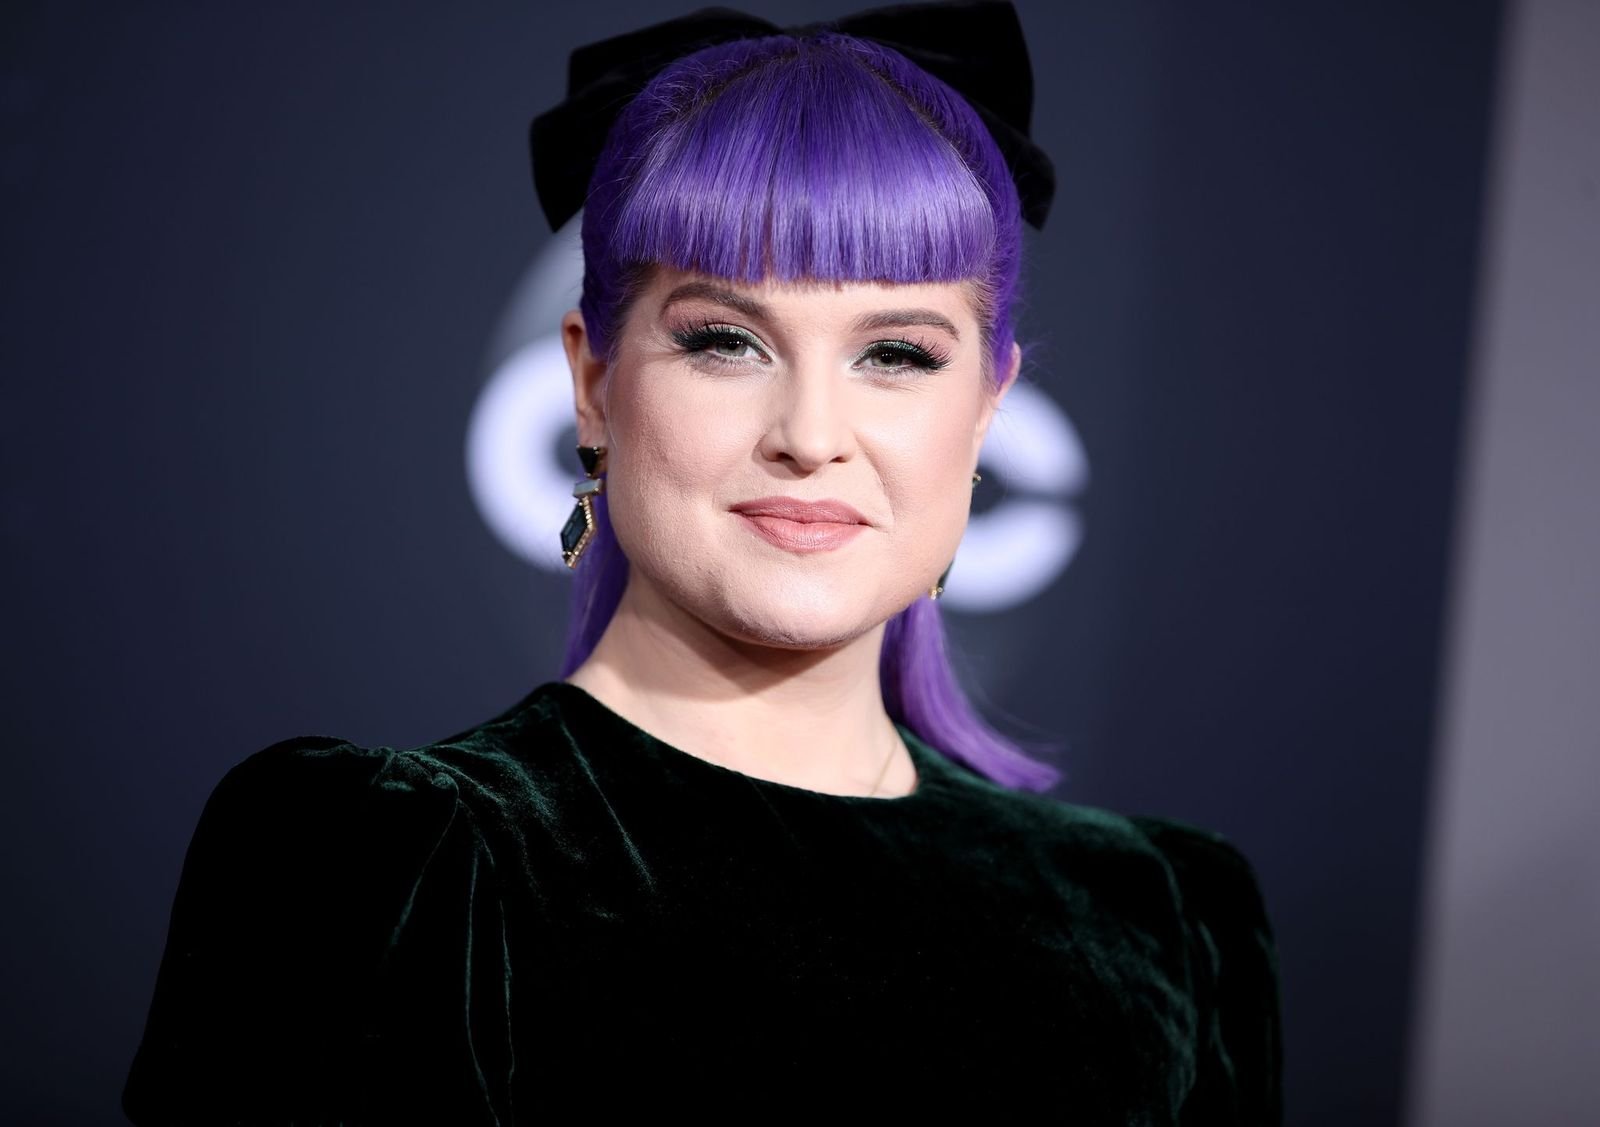 Kelly Osbourne at the 2019 American Music Awards in November 2019 in Los Angeles, California | Source: Getty Images